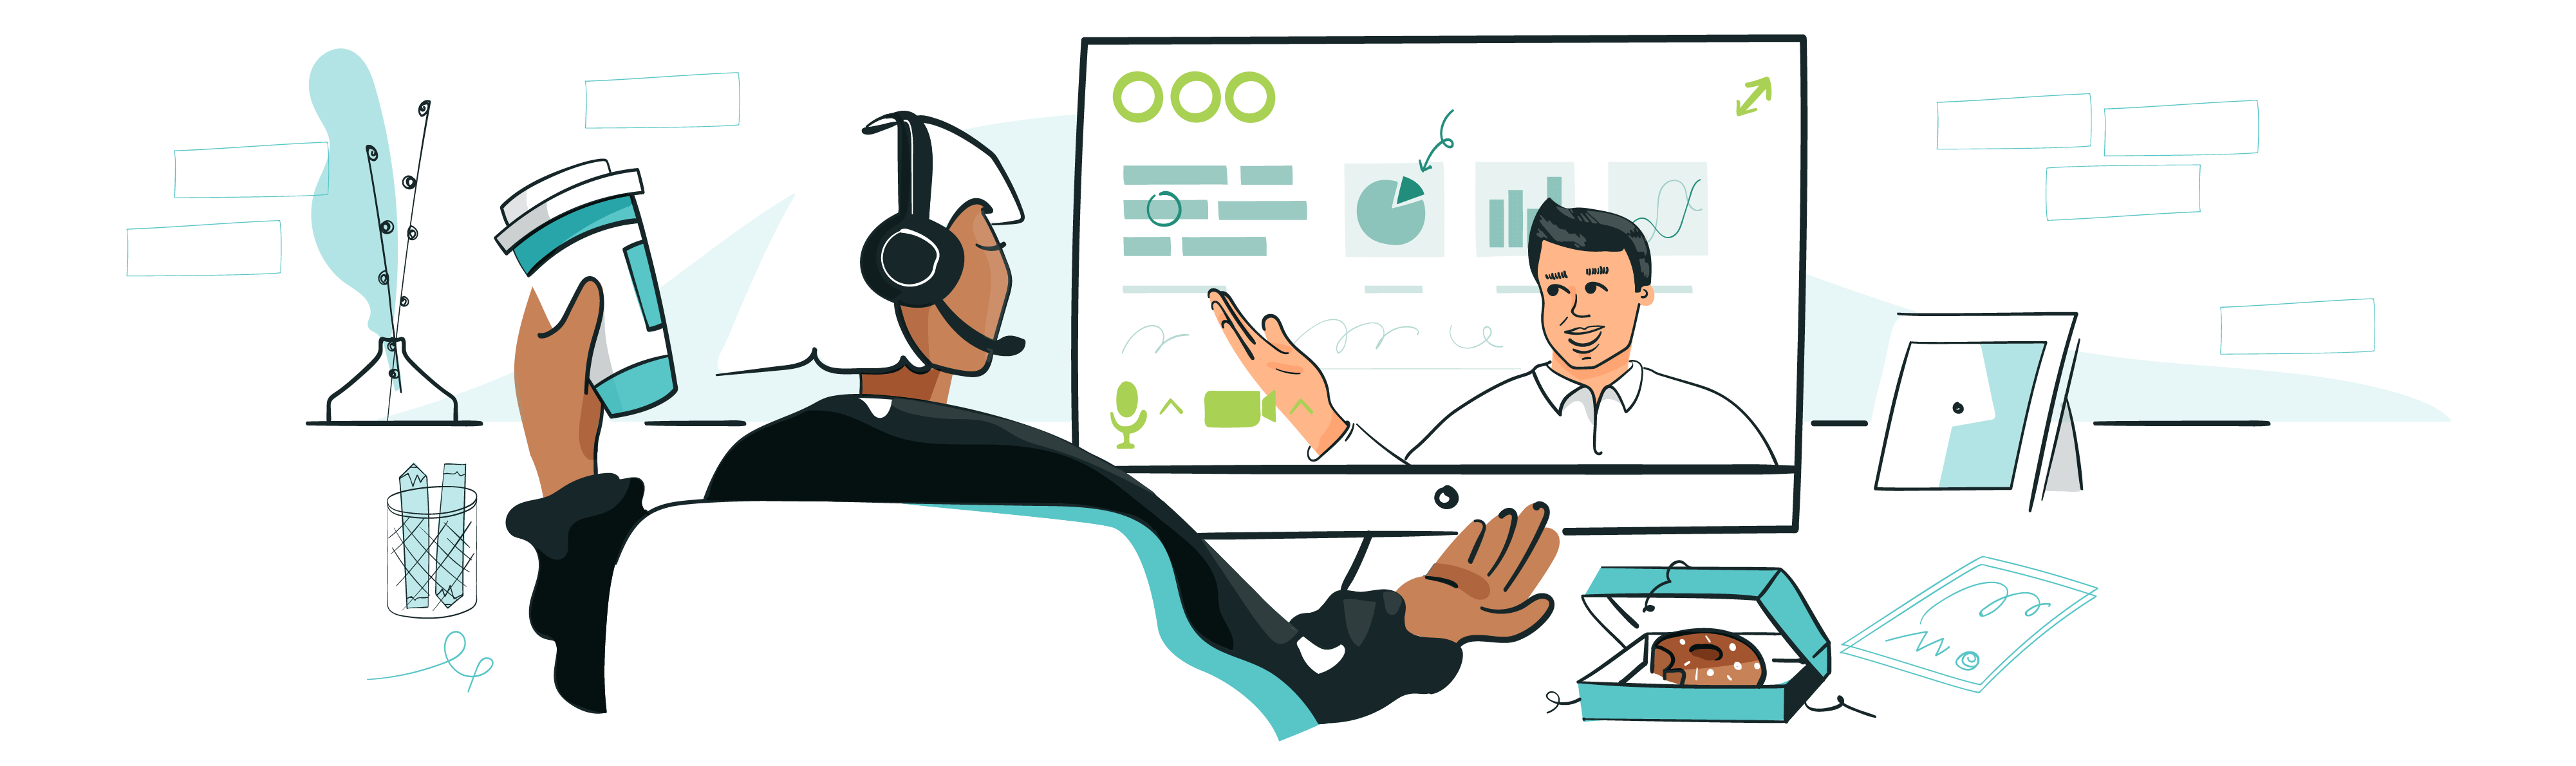 Illustration of two people on a video call